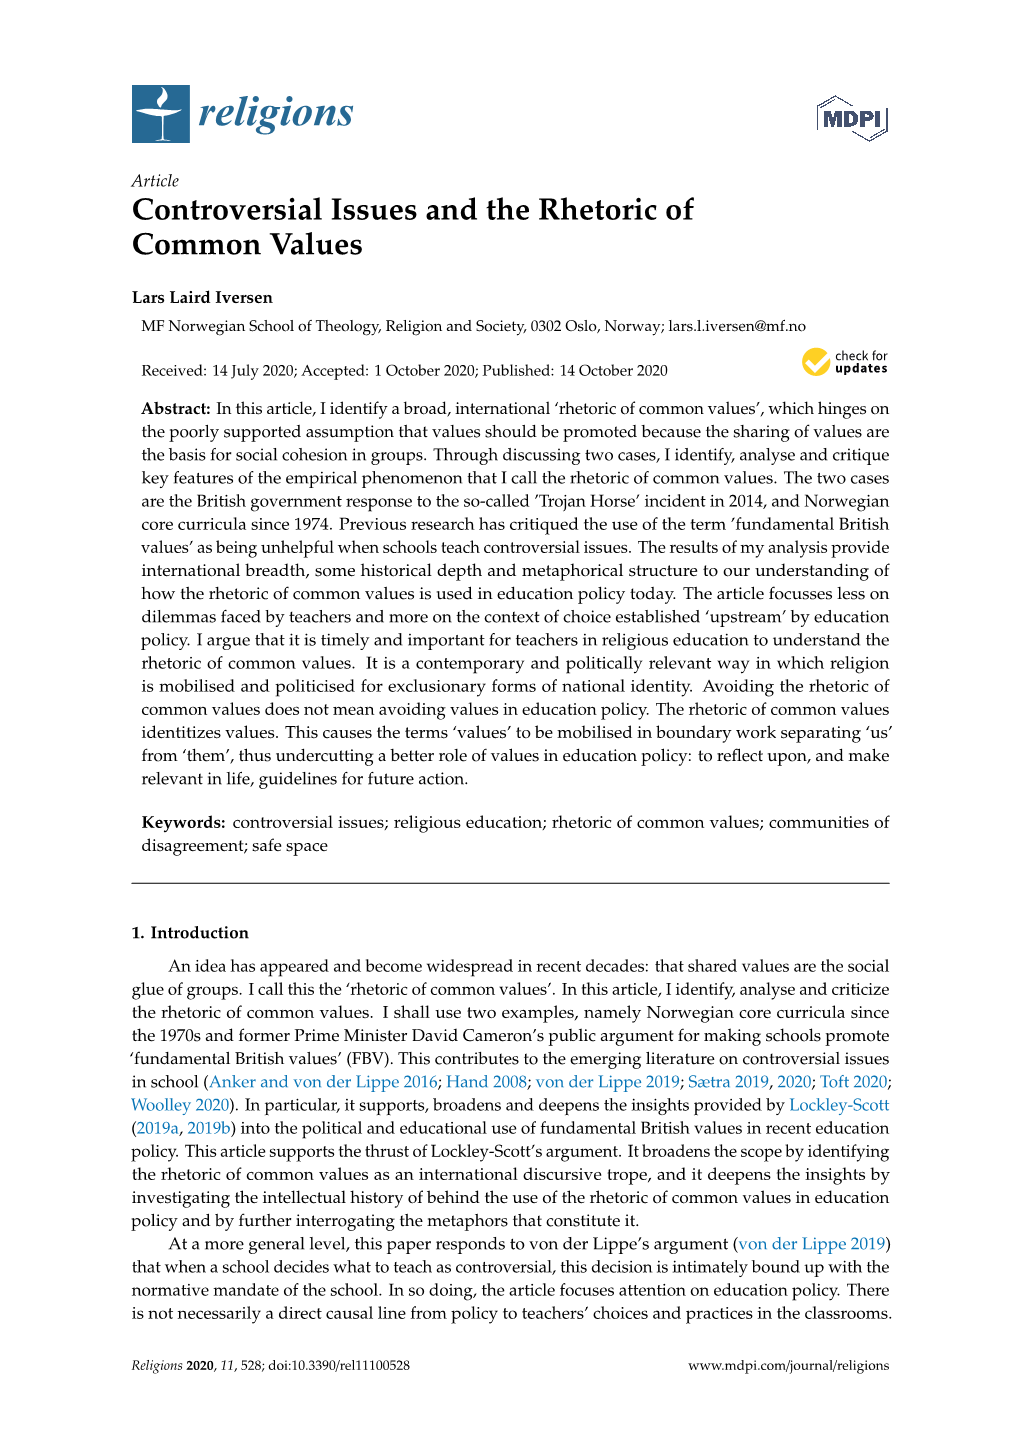 Controversial Issues and the Rhetoric of Common Values